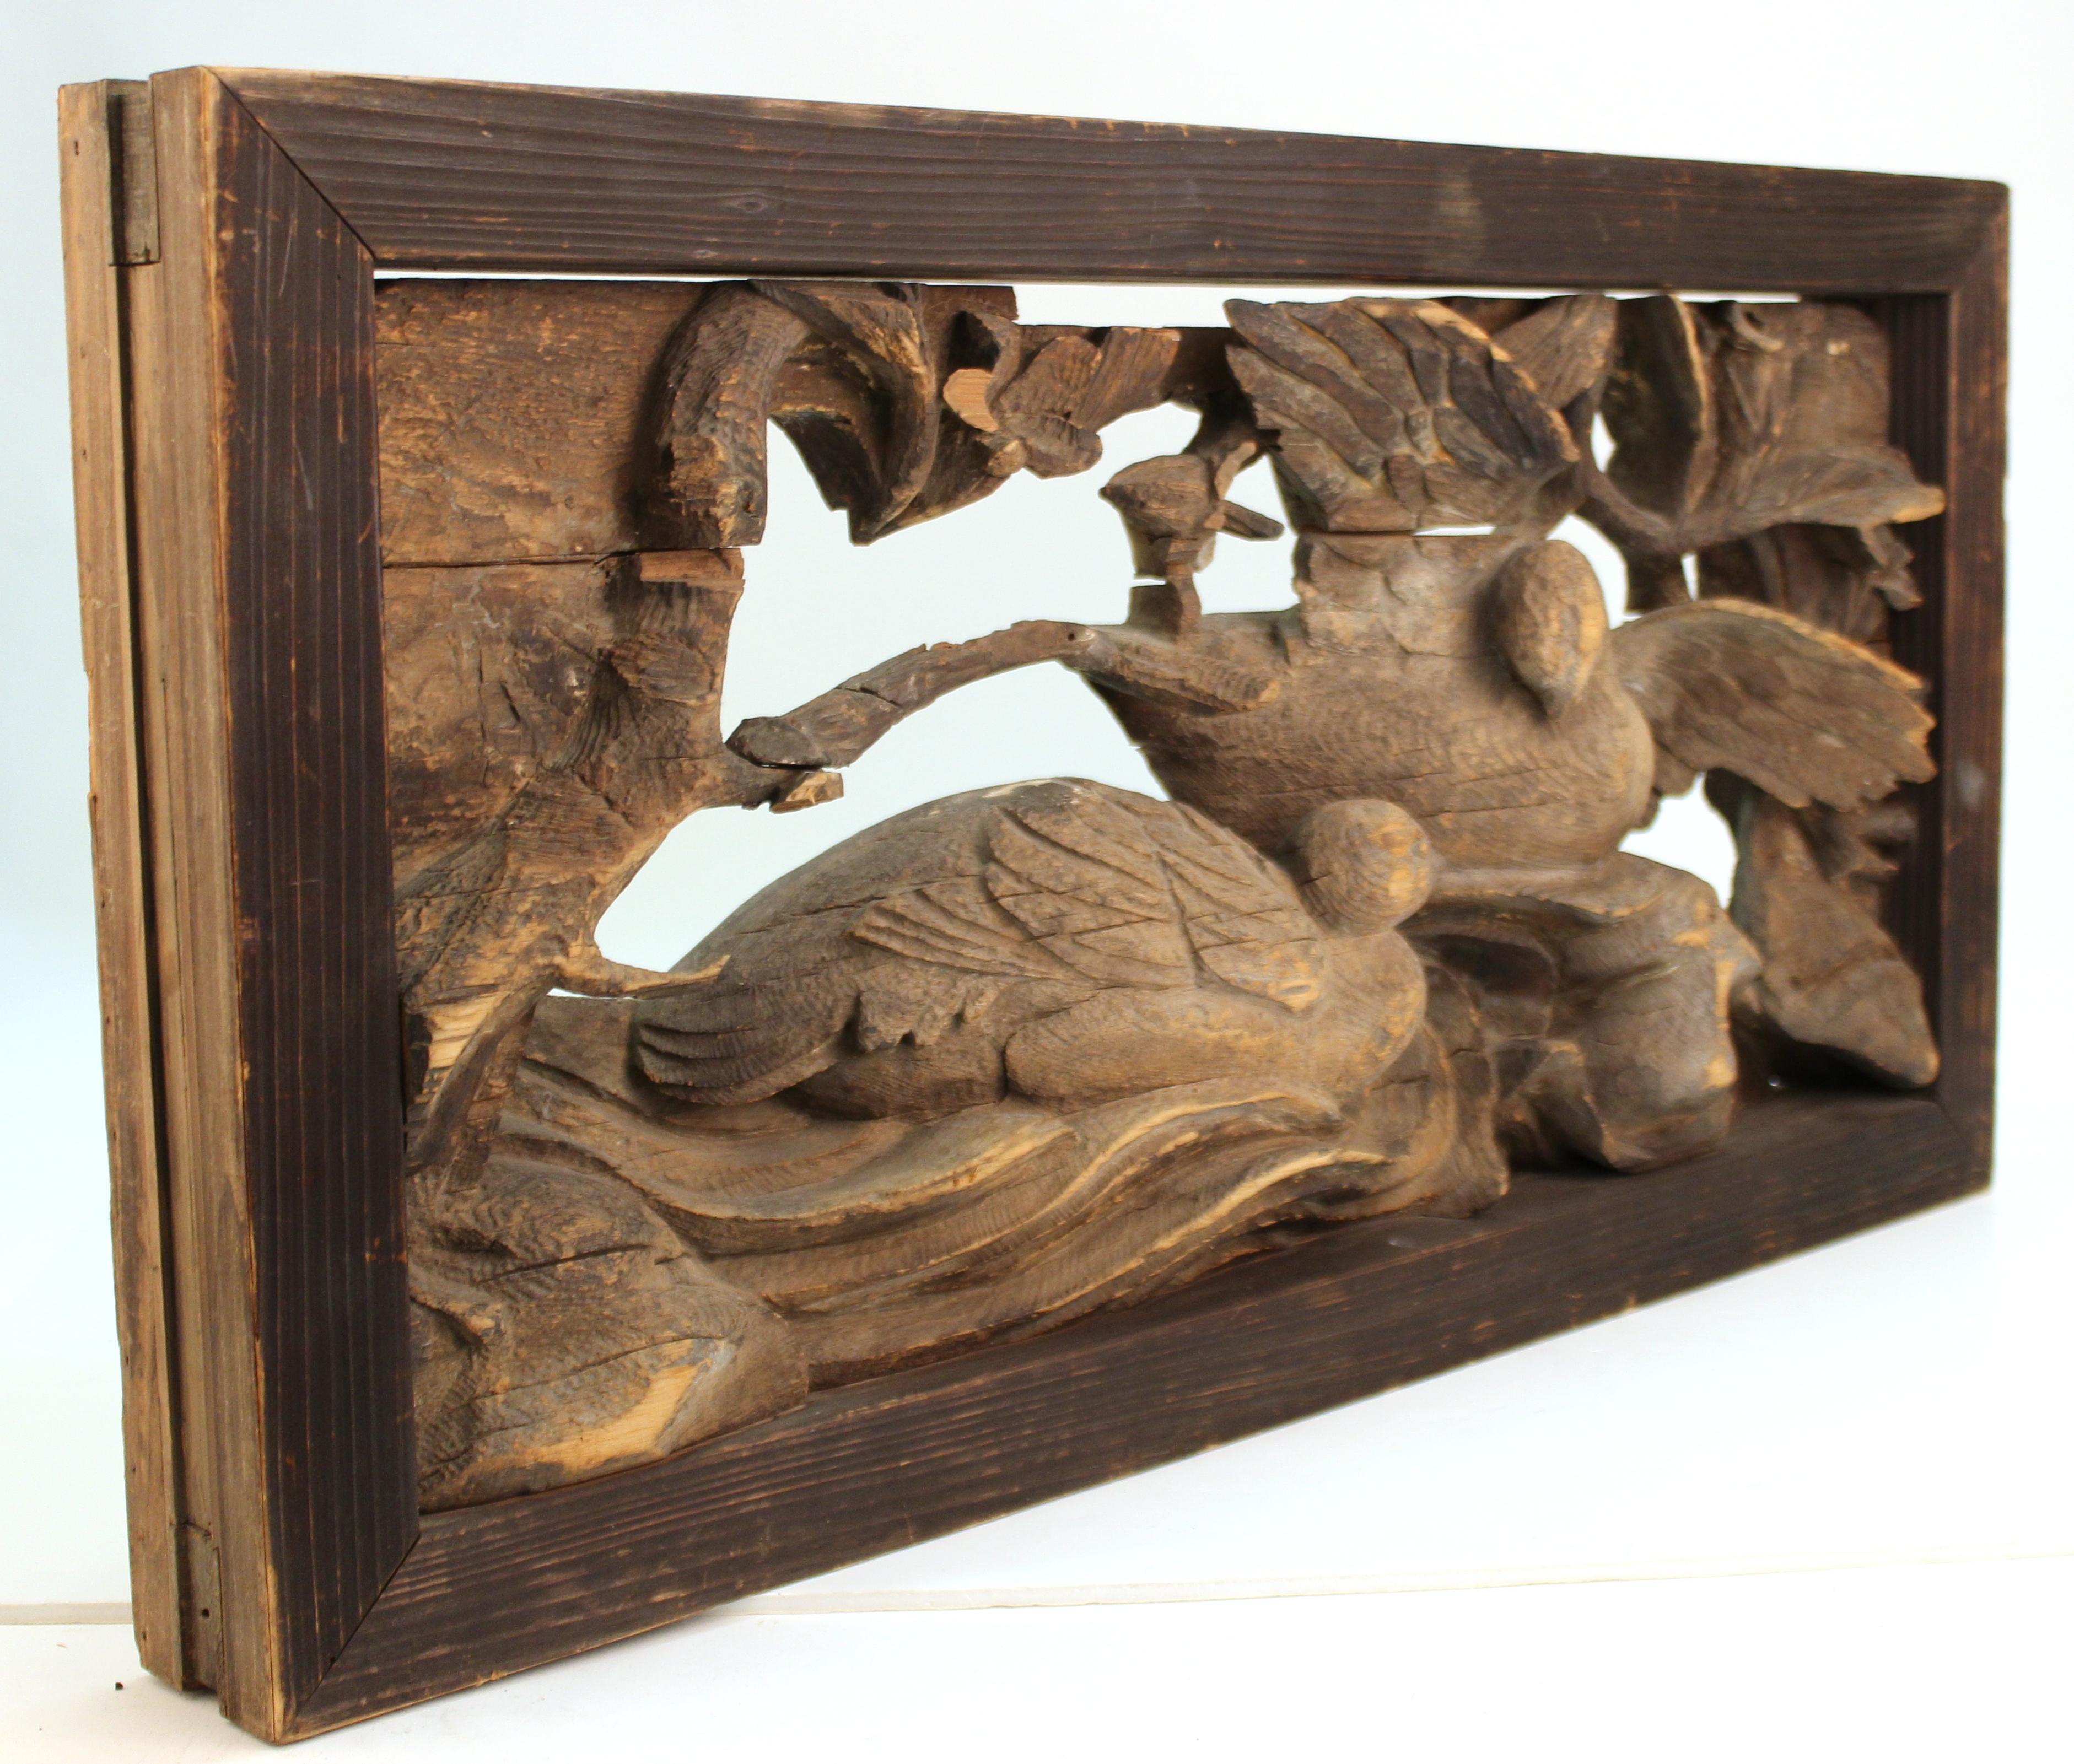 Japanese Edo period wooden temple carving with two doves in branches. The scene is set into a frame that suggests the piece having been initially part of a building element or a furniture piece. Dates to the 17th century.